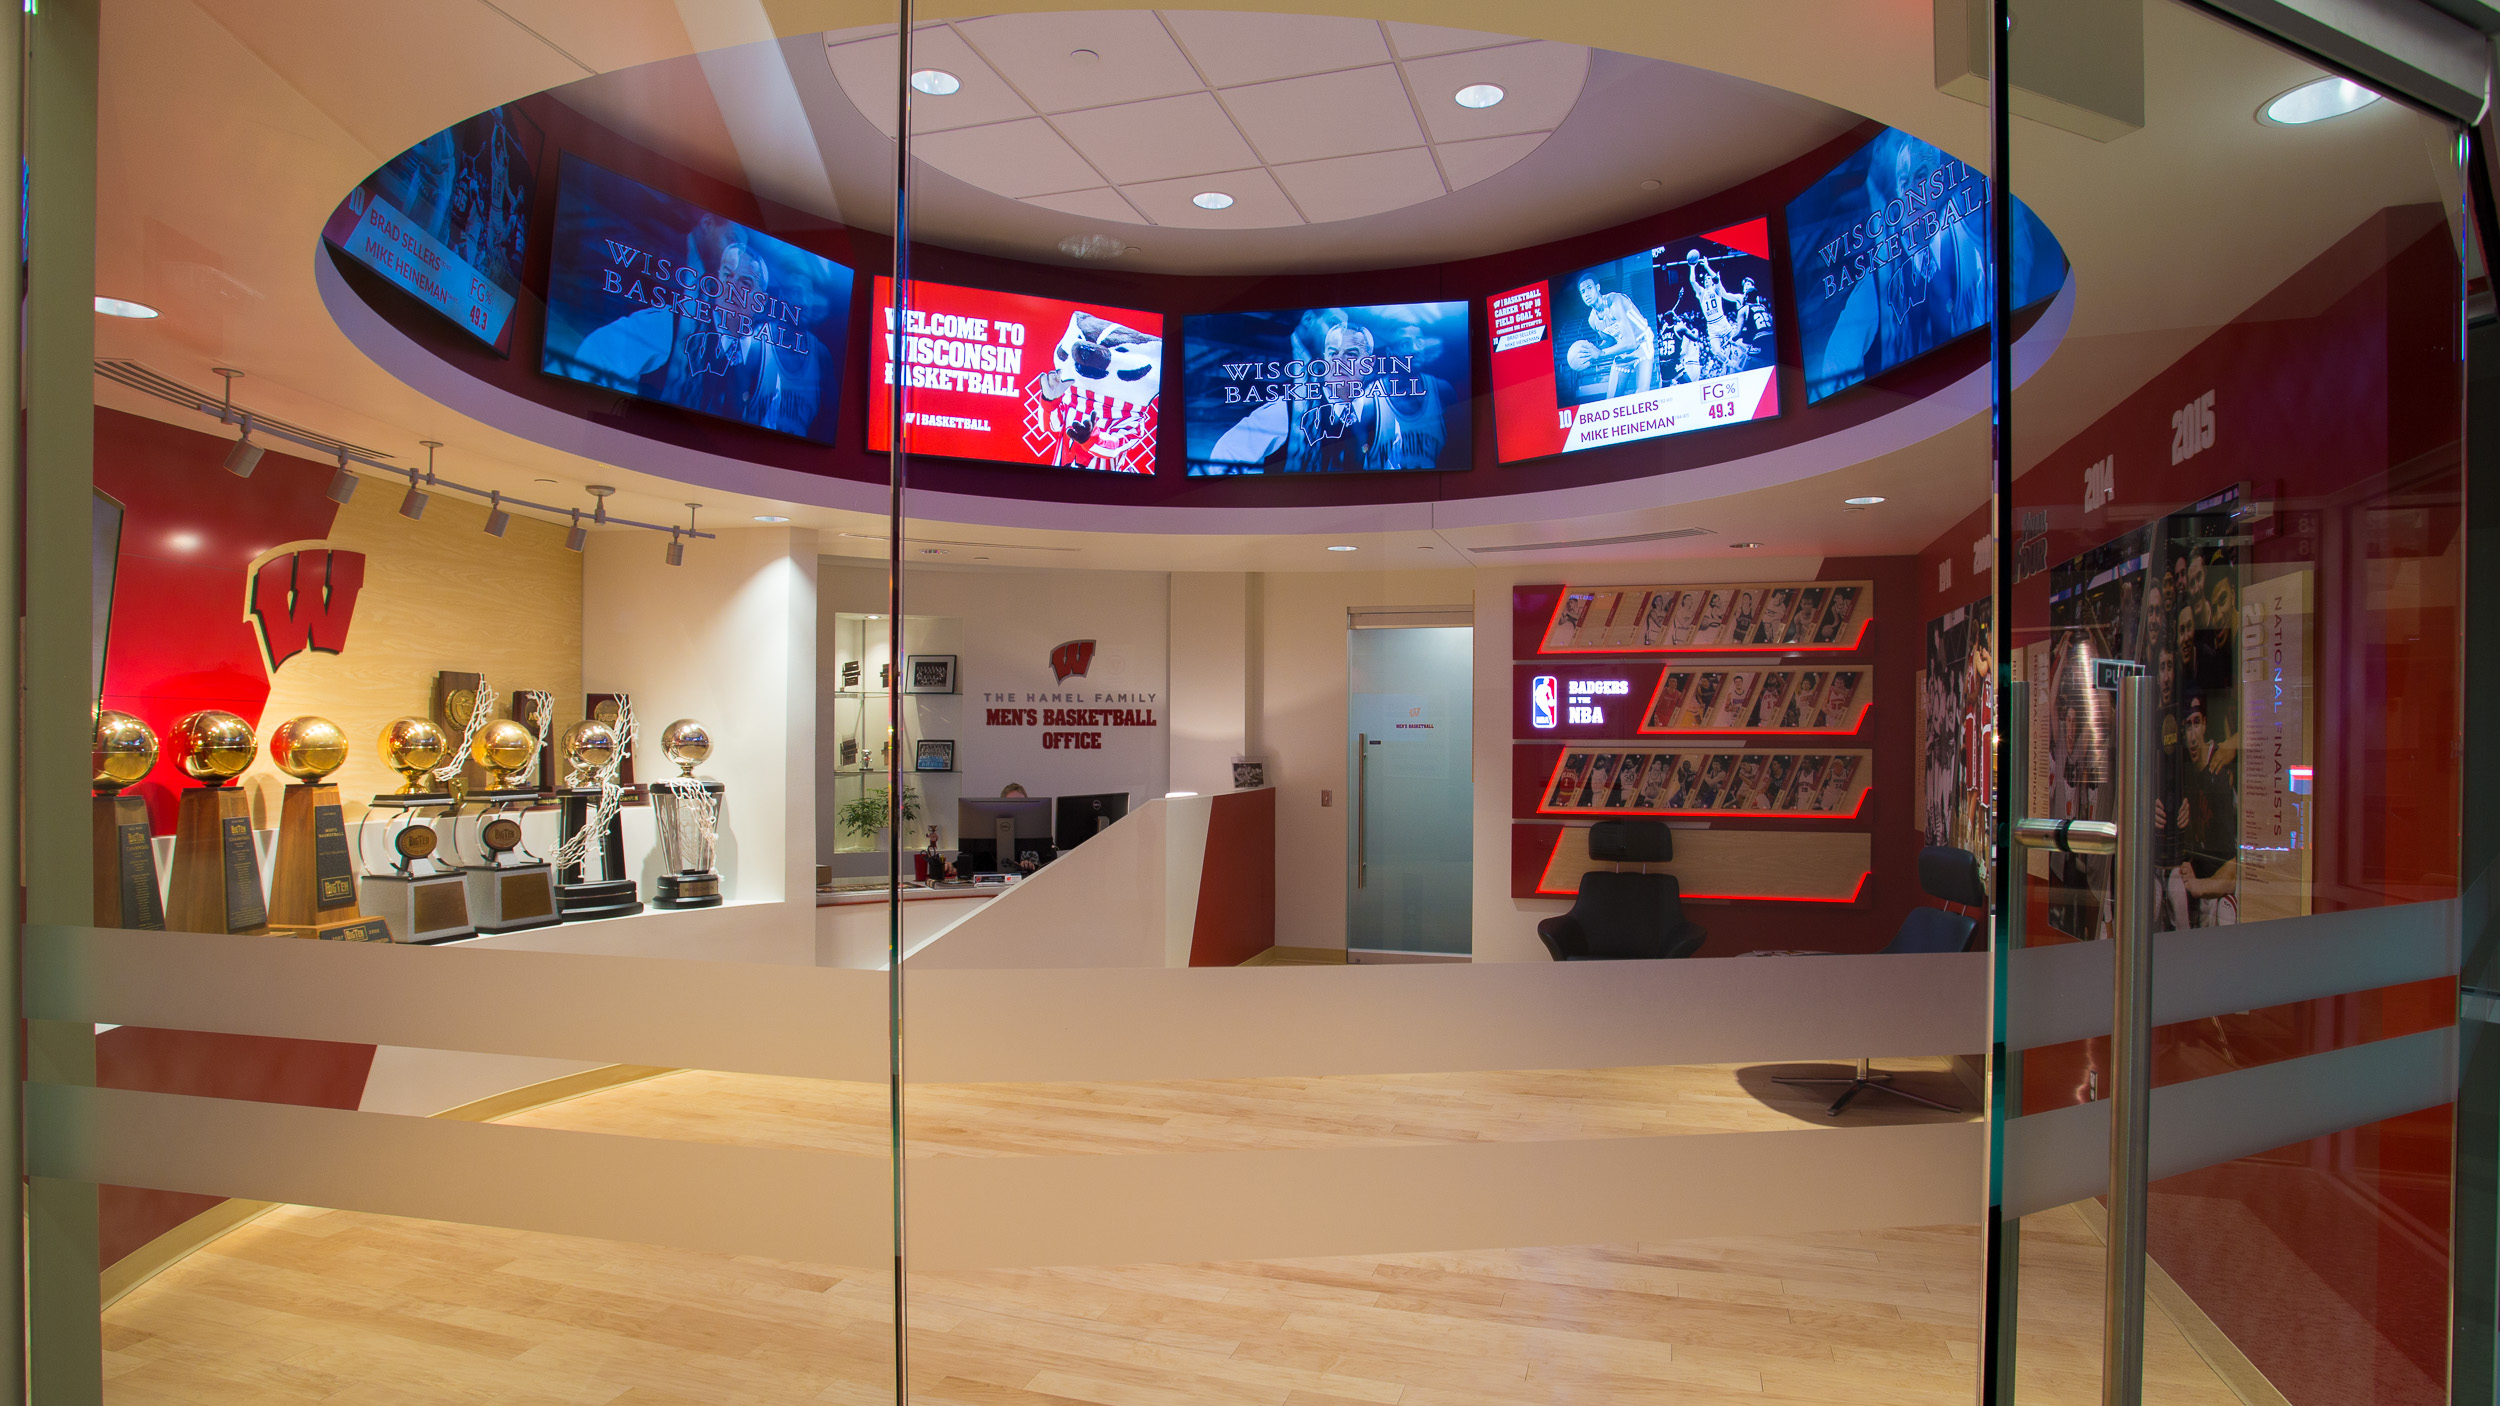 University of Wisconsin - Basketball Offices Facility Branding